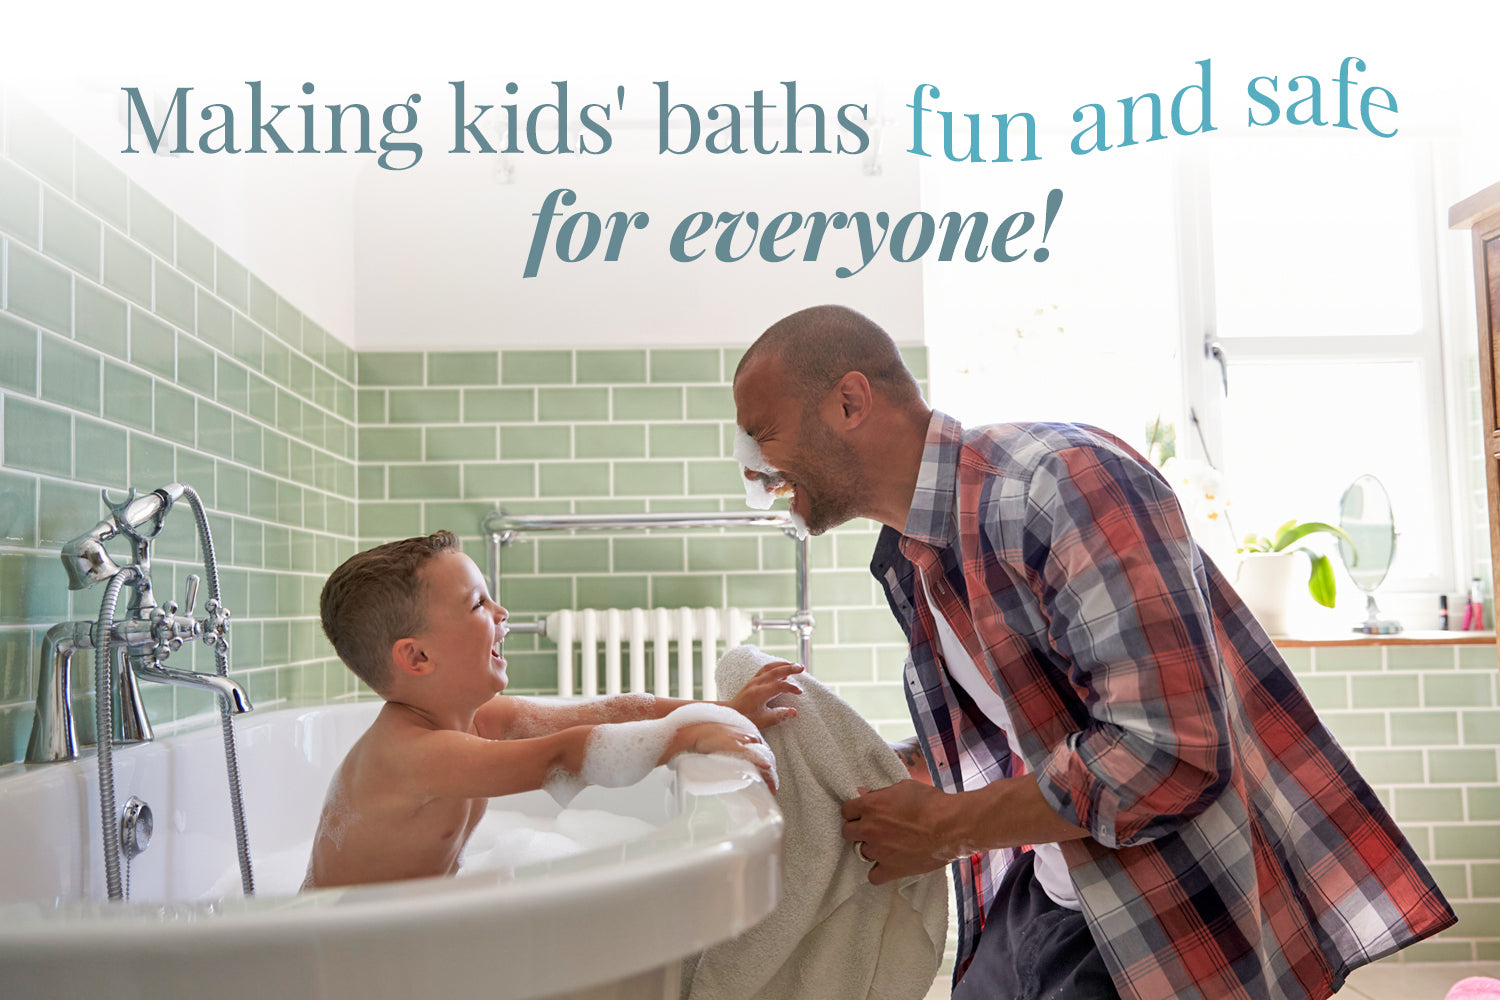 Making the most out of bath-times safely